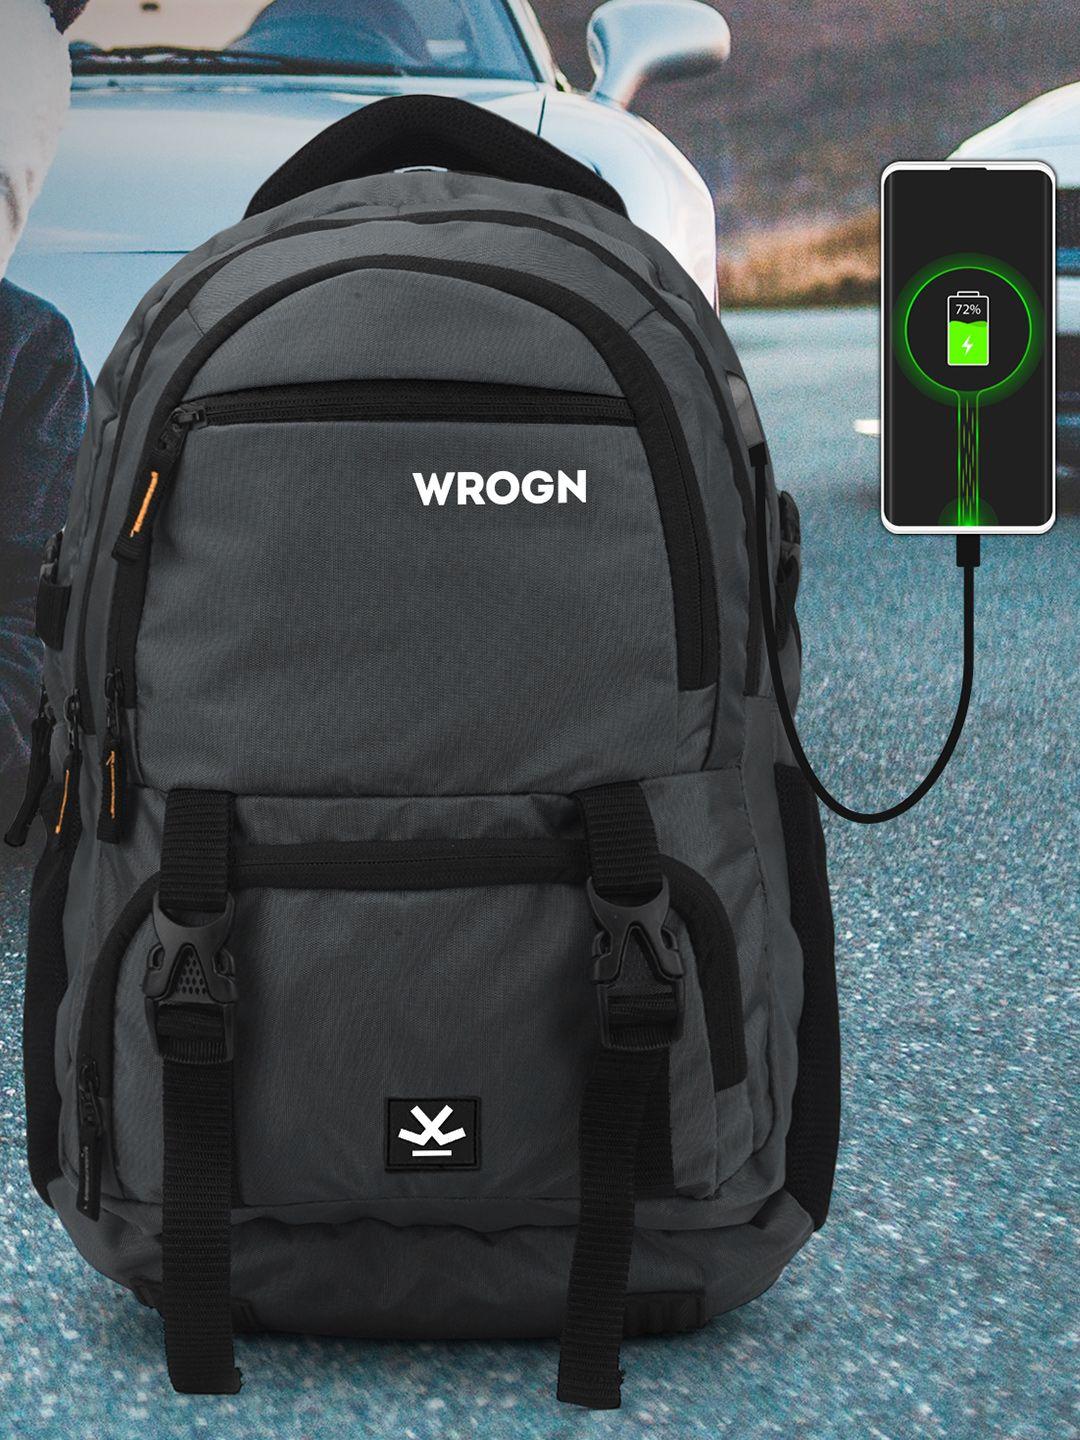 wrogn brand logo laptop backpack with usb charging port